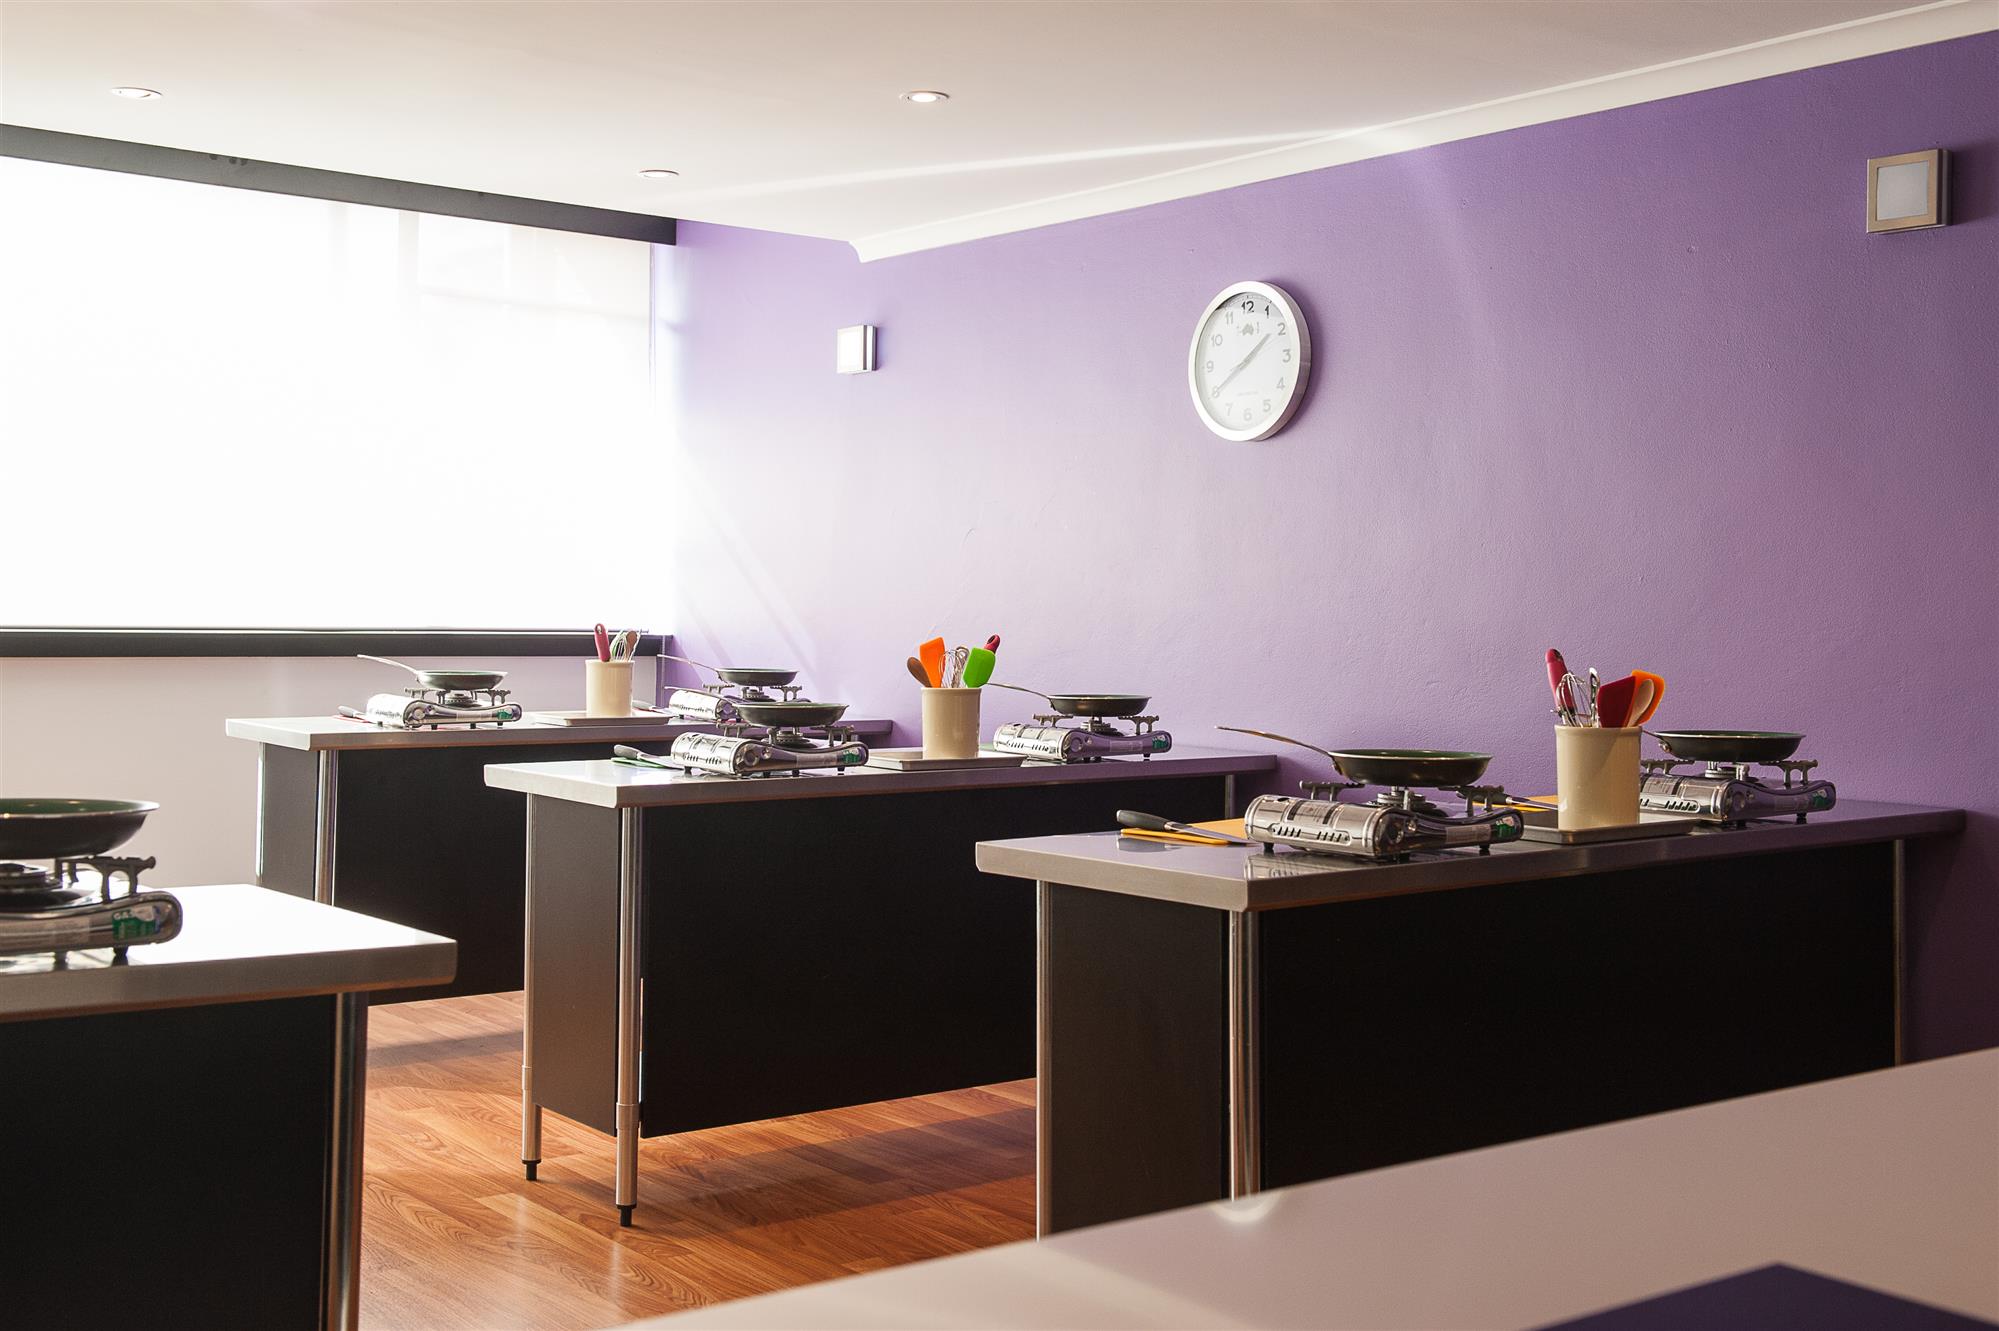 Cooking clases in the Purple Kitchen